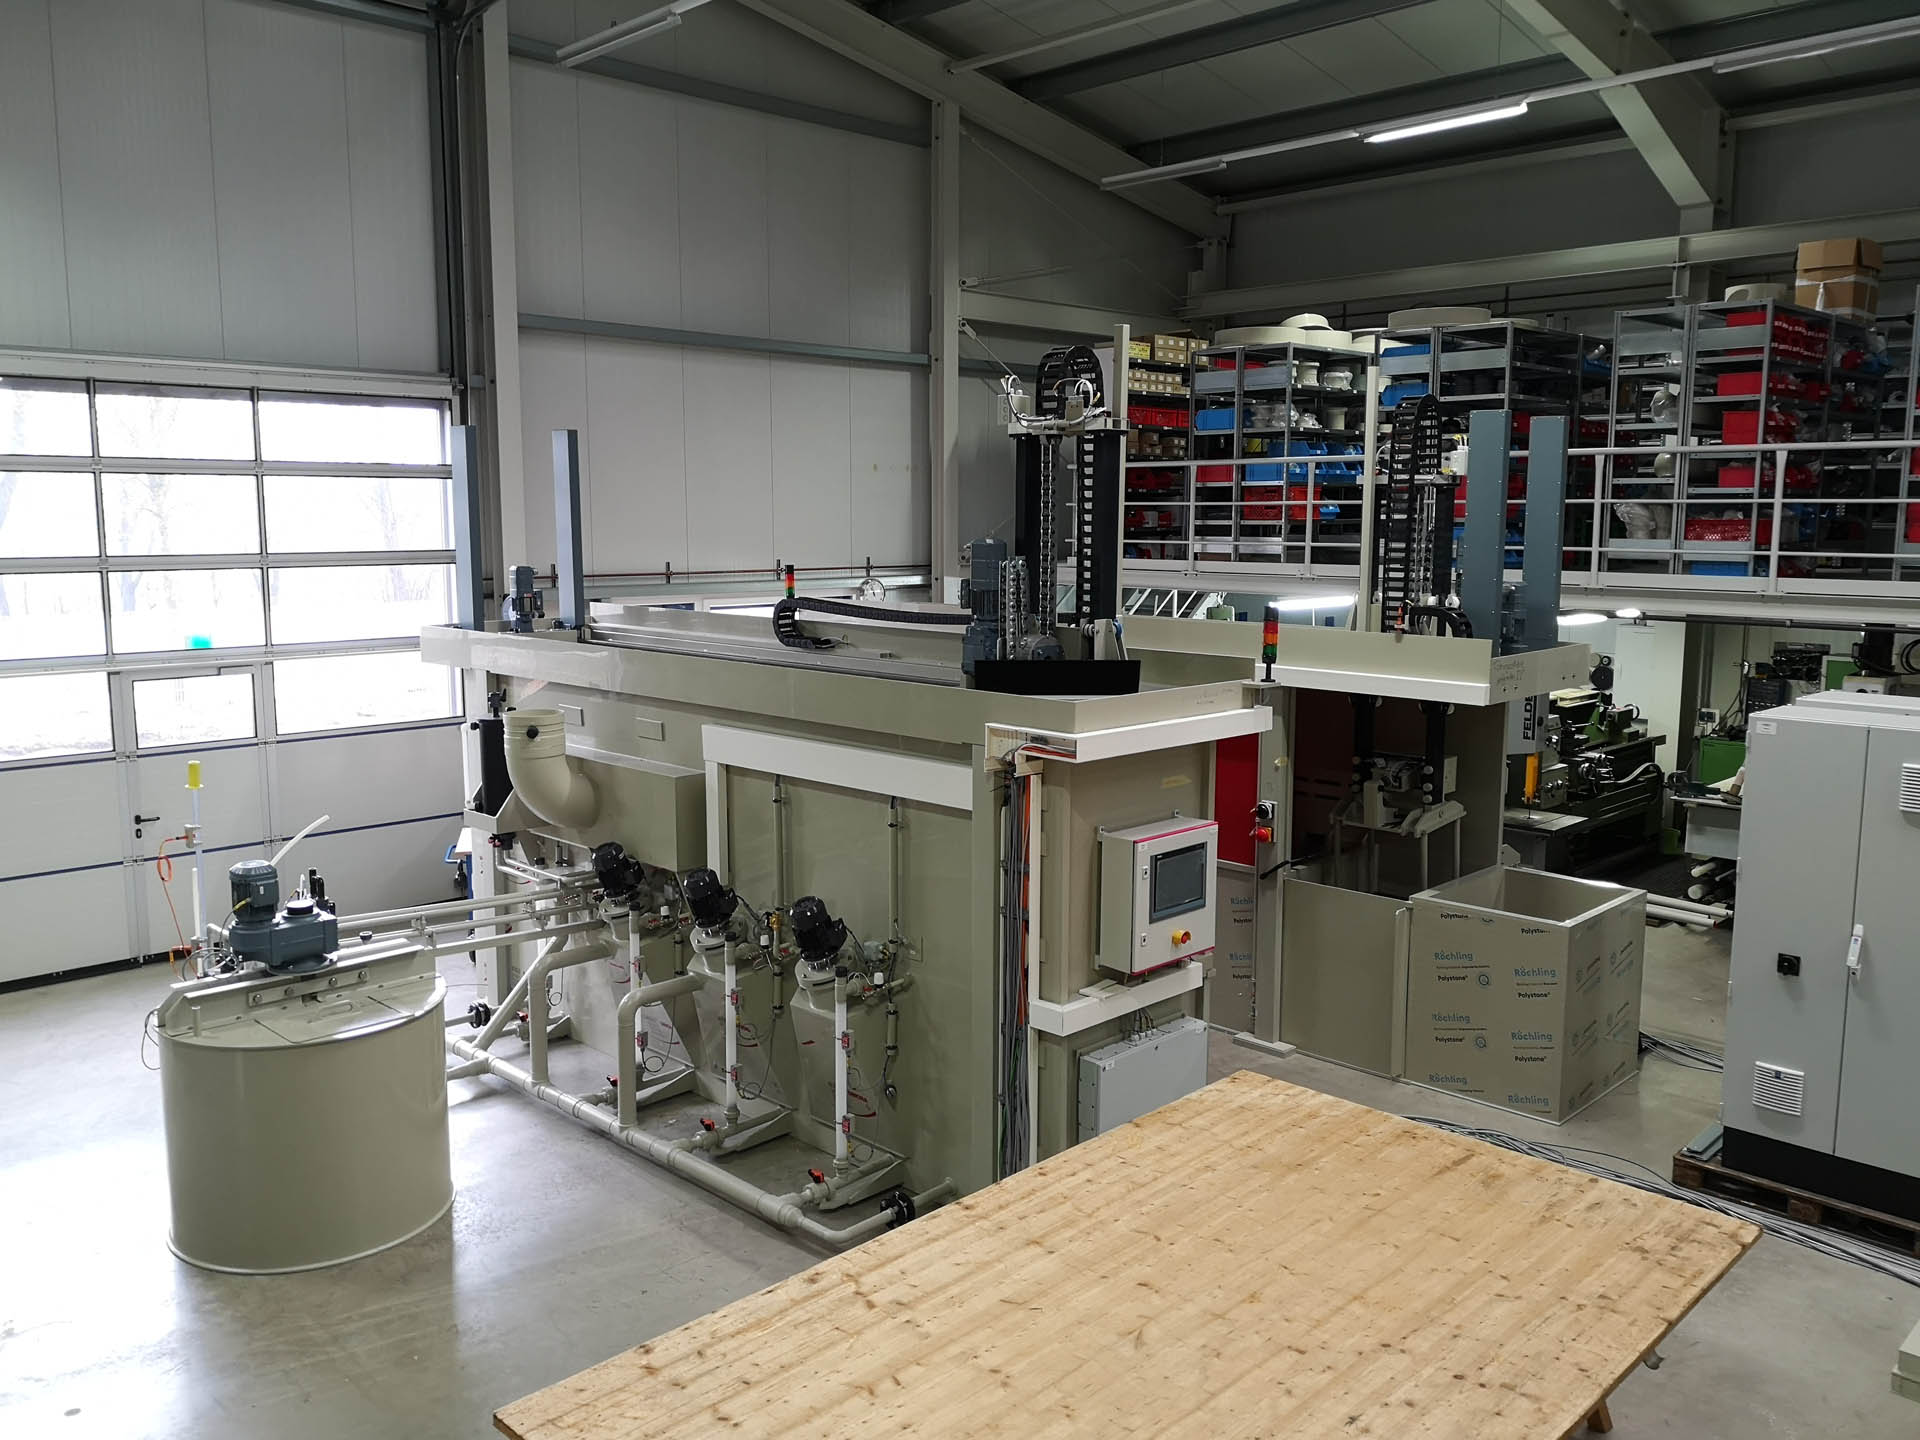 Thermoplastic acid polishing system for glass by Neutra in production hall